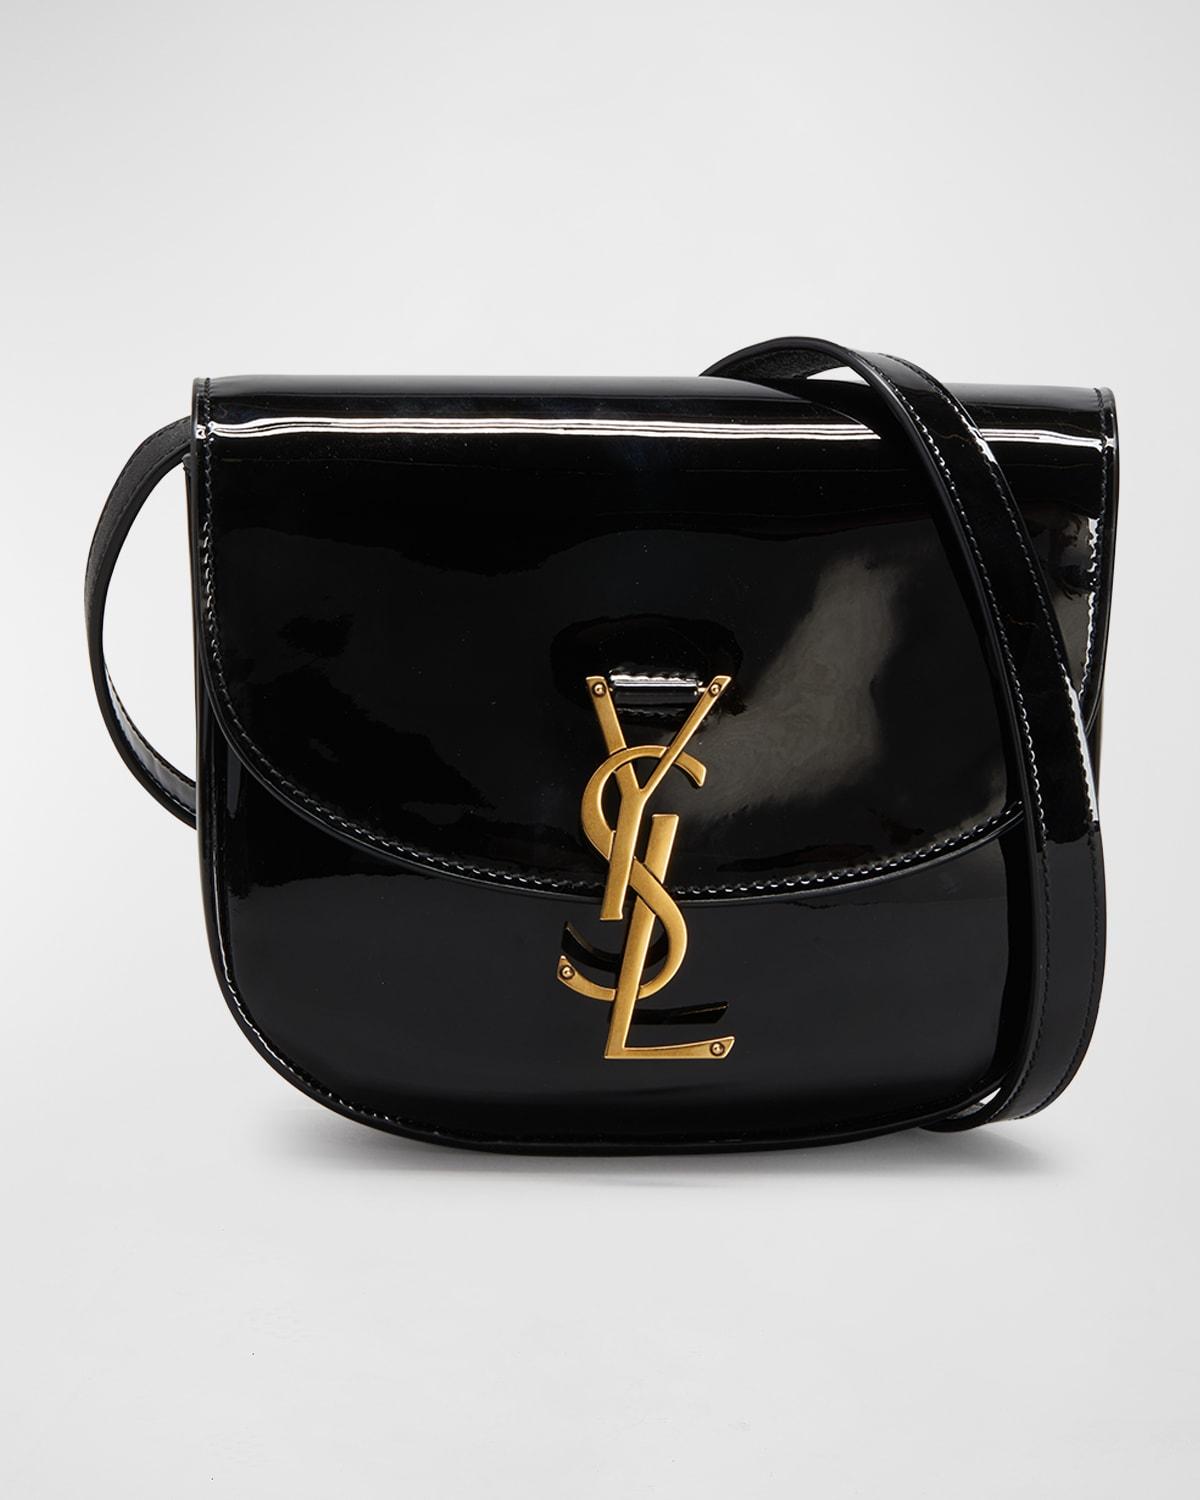 Saint Laurent Kaia Small Ysl Patent Leather Crossbody Bag in Black